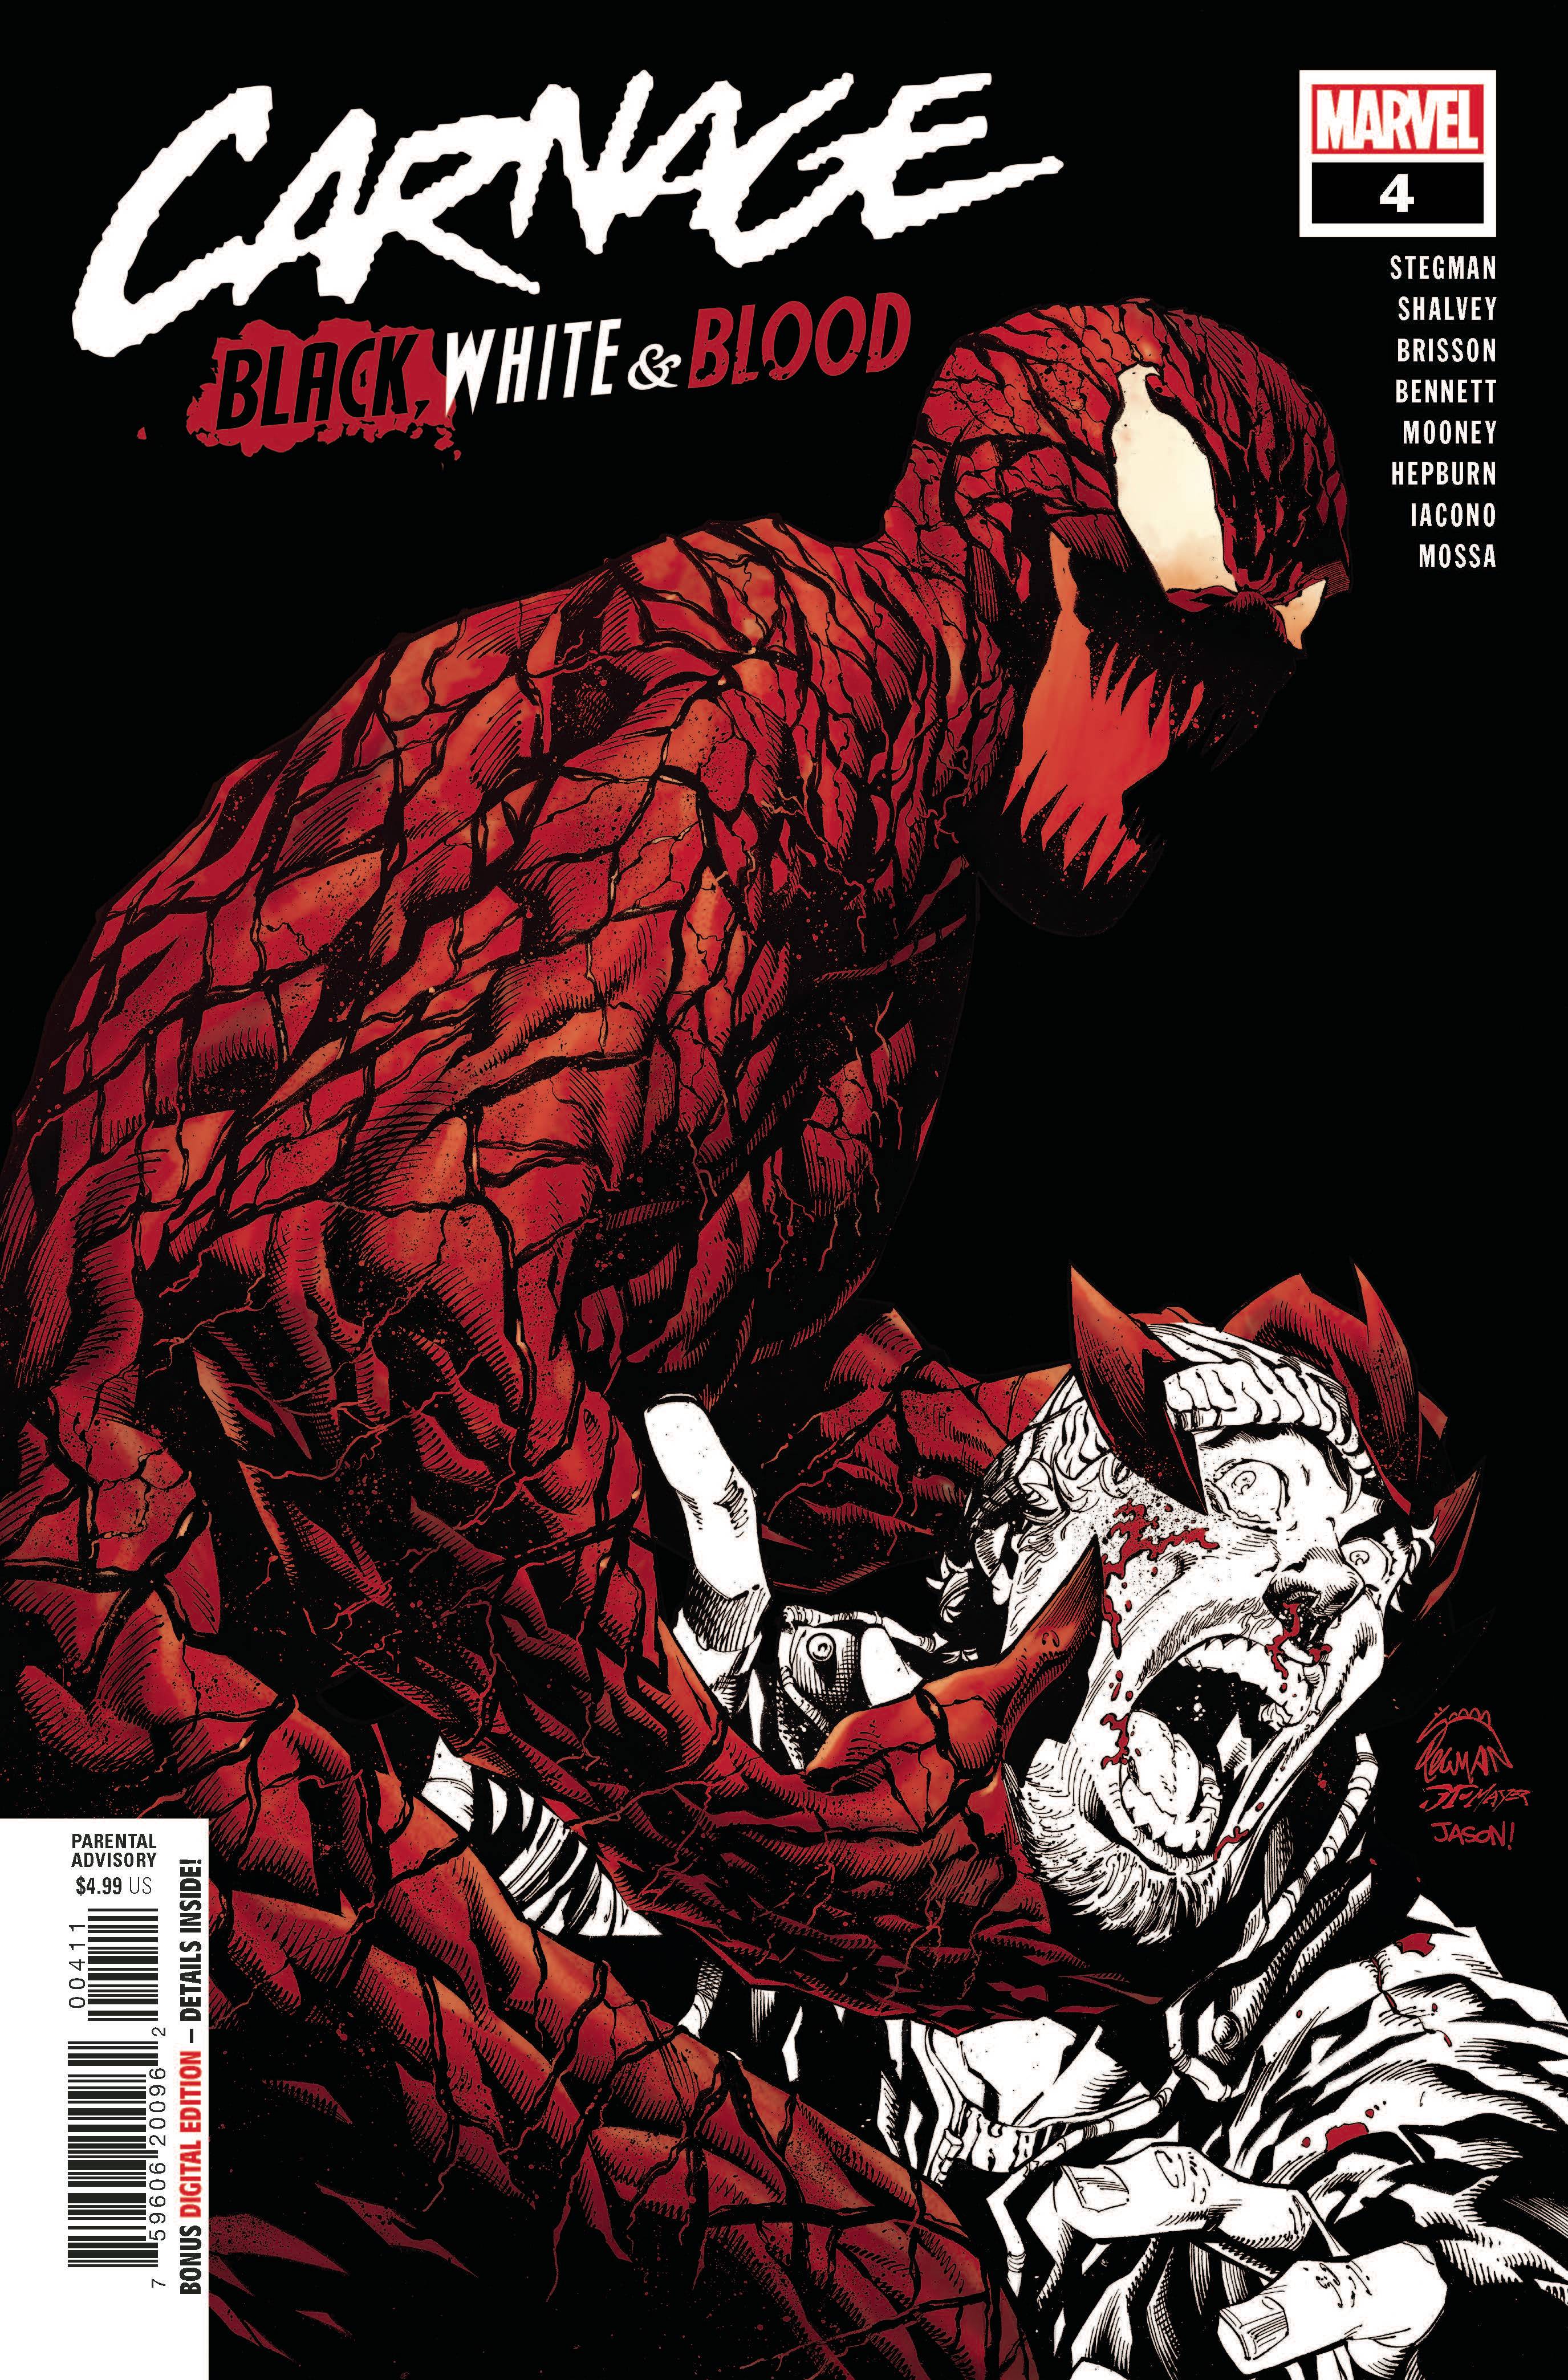 CARNAGE BLACK WHITE AND BLOOD #4 (OF 4) | Game Master's Emporium (The New GME)